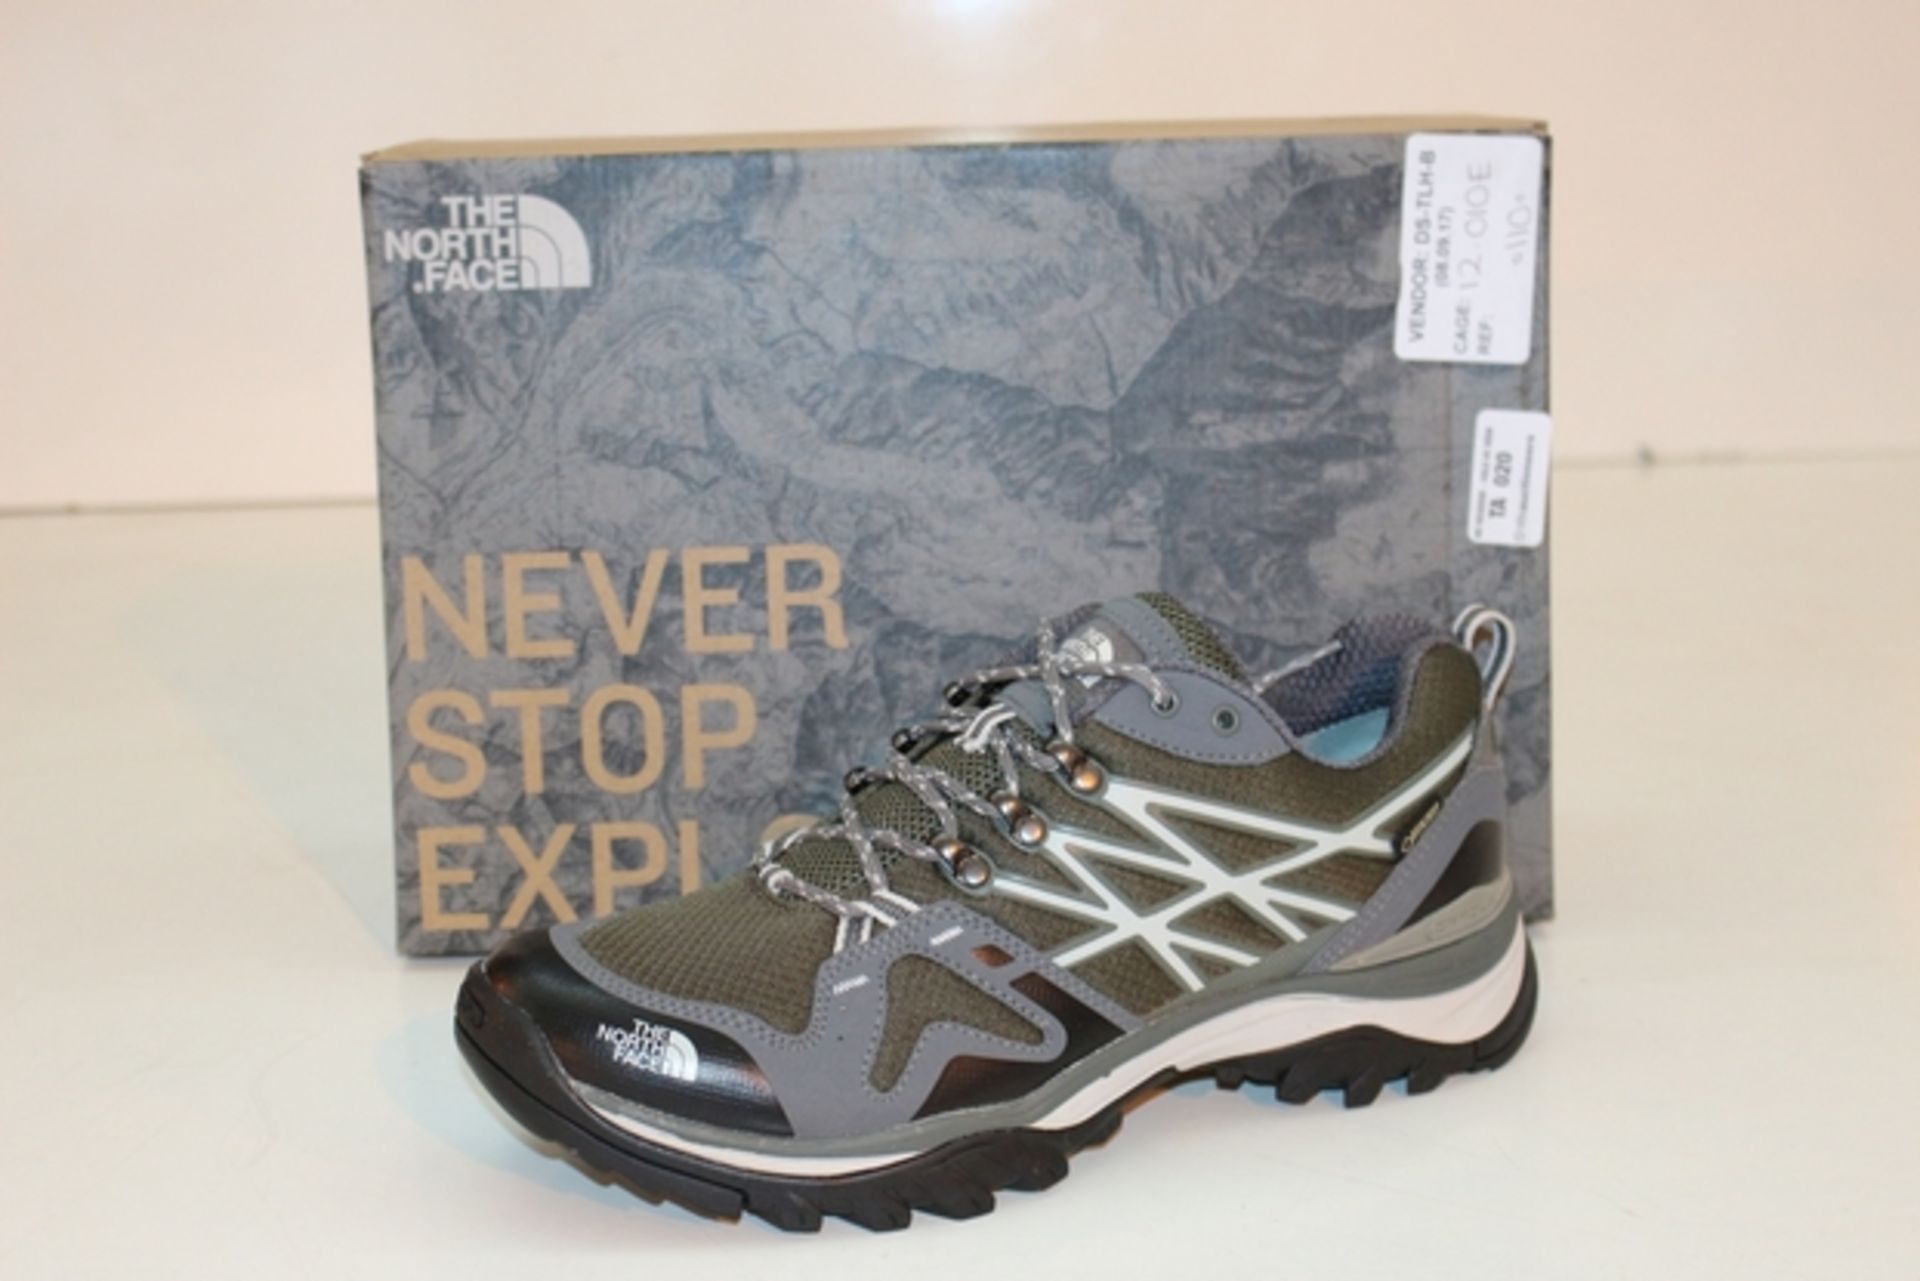 1X BOXED UNUSED PAIR OF NORTH FACE MEN'S HEDGE HOG FAST PACK GTX SHOES SIZE 8 RRP £110 (DS-TLH-B) (